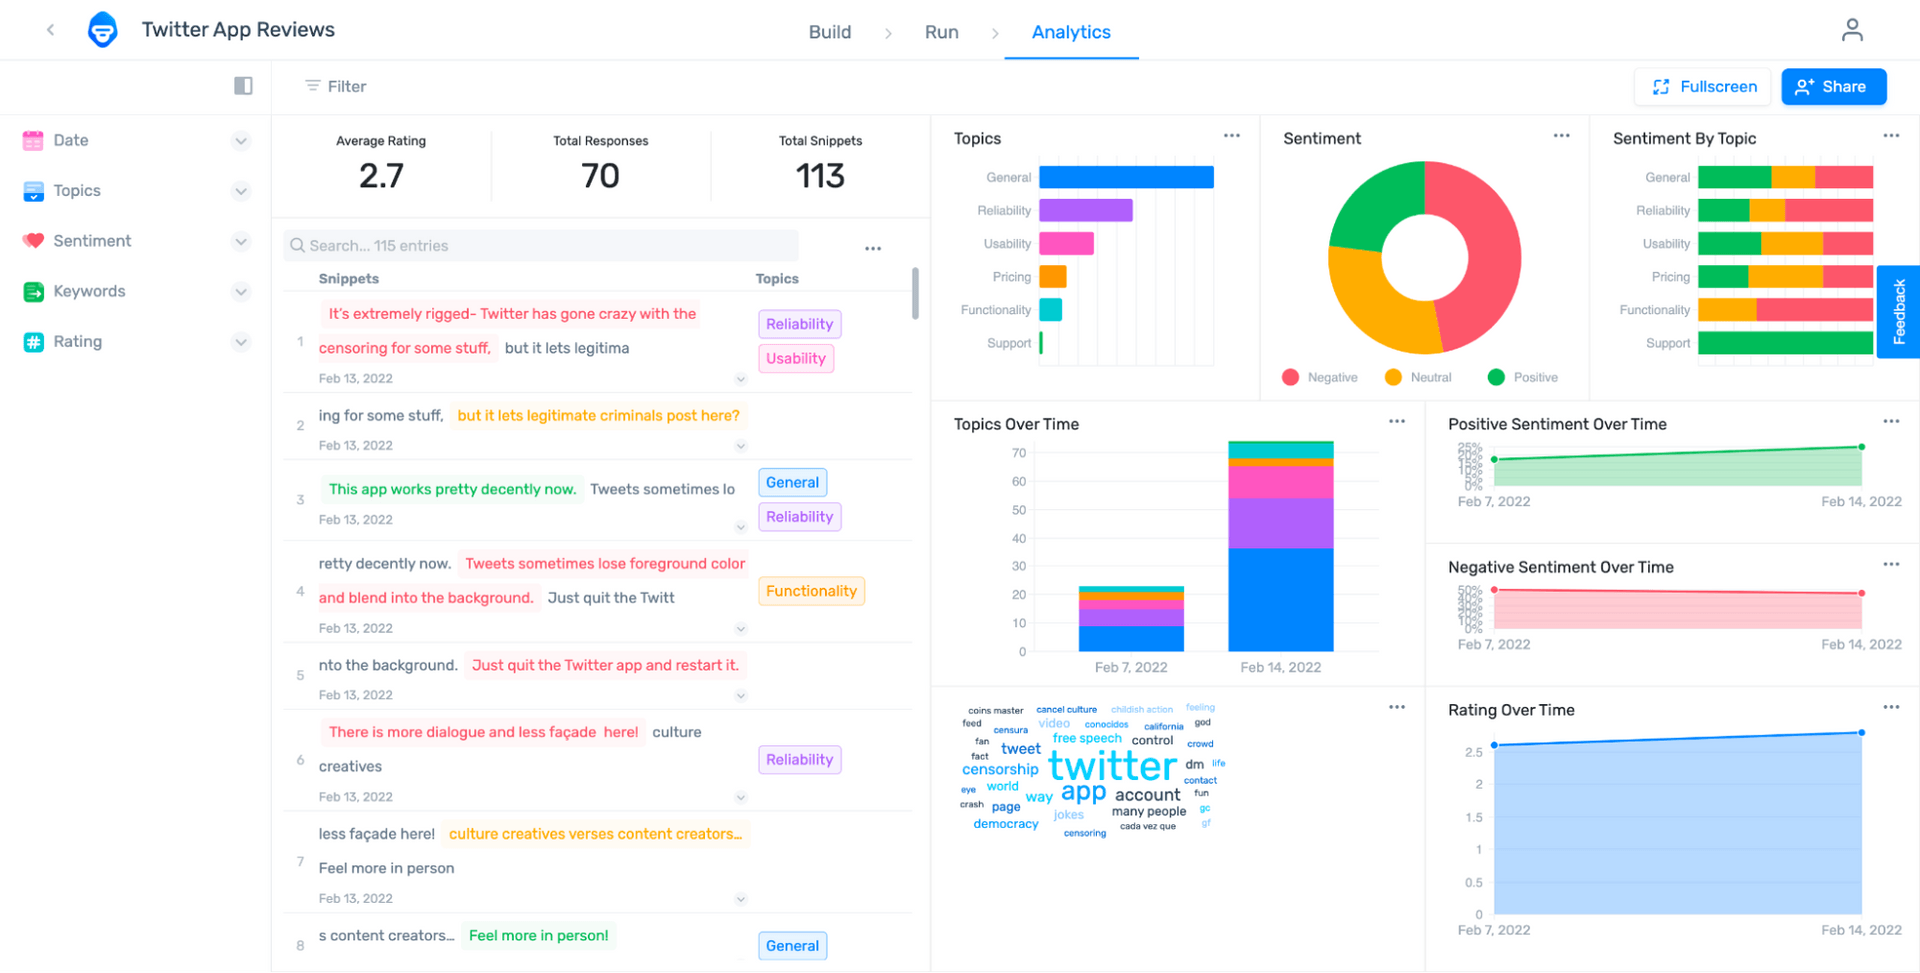 MonkeyLearn studio dashboard tailored to Twitter App Reviews.